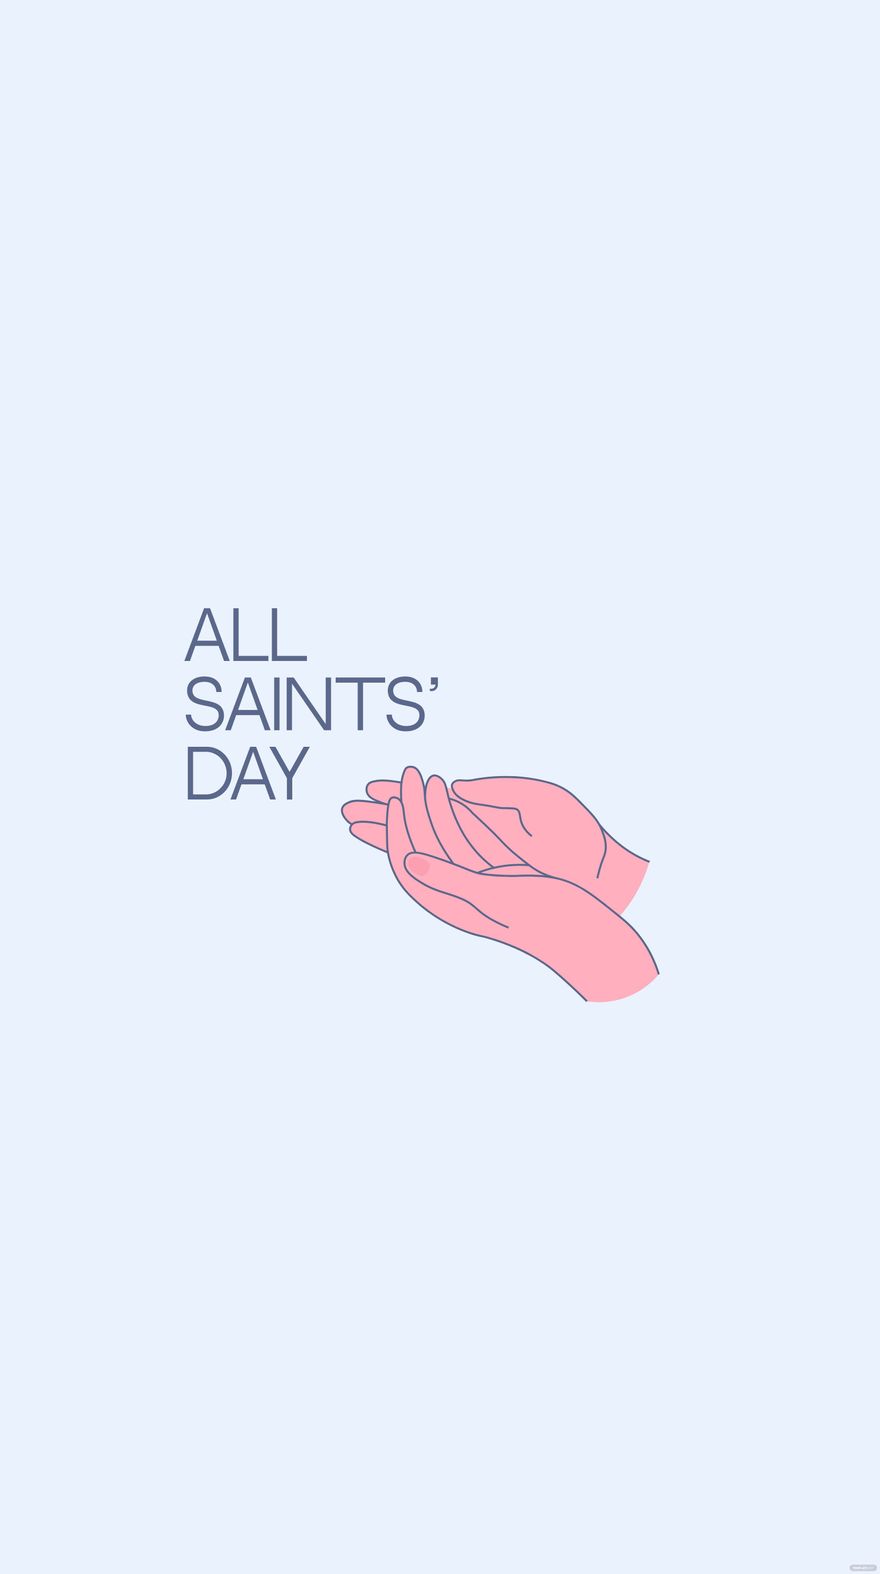 Free All Saints' Day iPhone Background in PDF, Illustrator, PSD, EPS, SVG, JPG, PNG